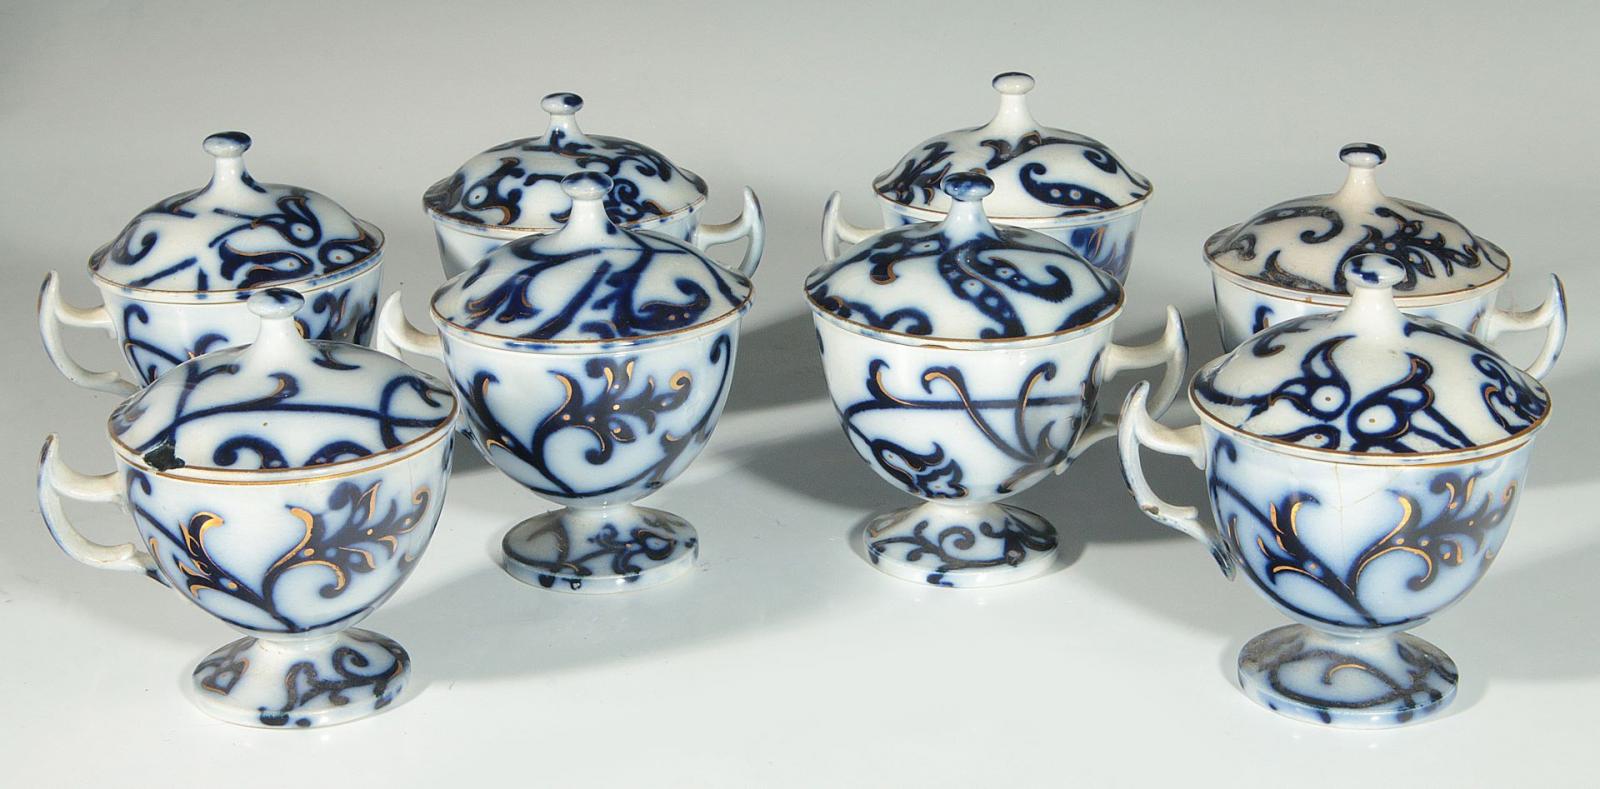 EIGHT 'ROYAL LILY' PATTERN FLOW BLUE COVERED CUPS